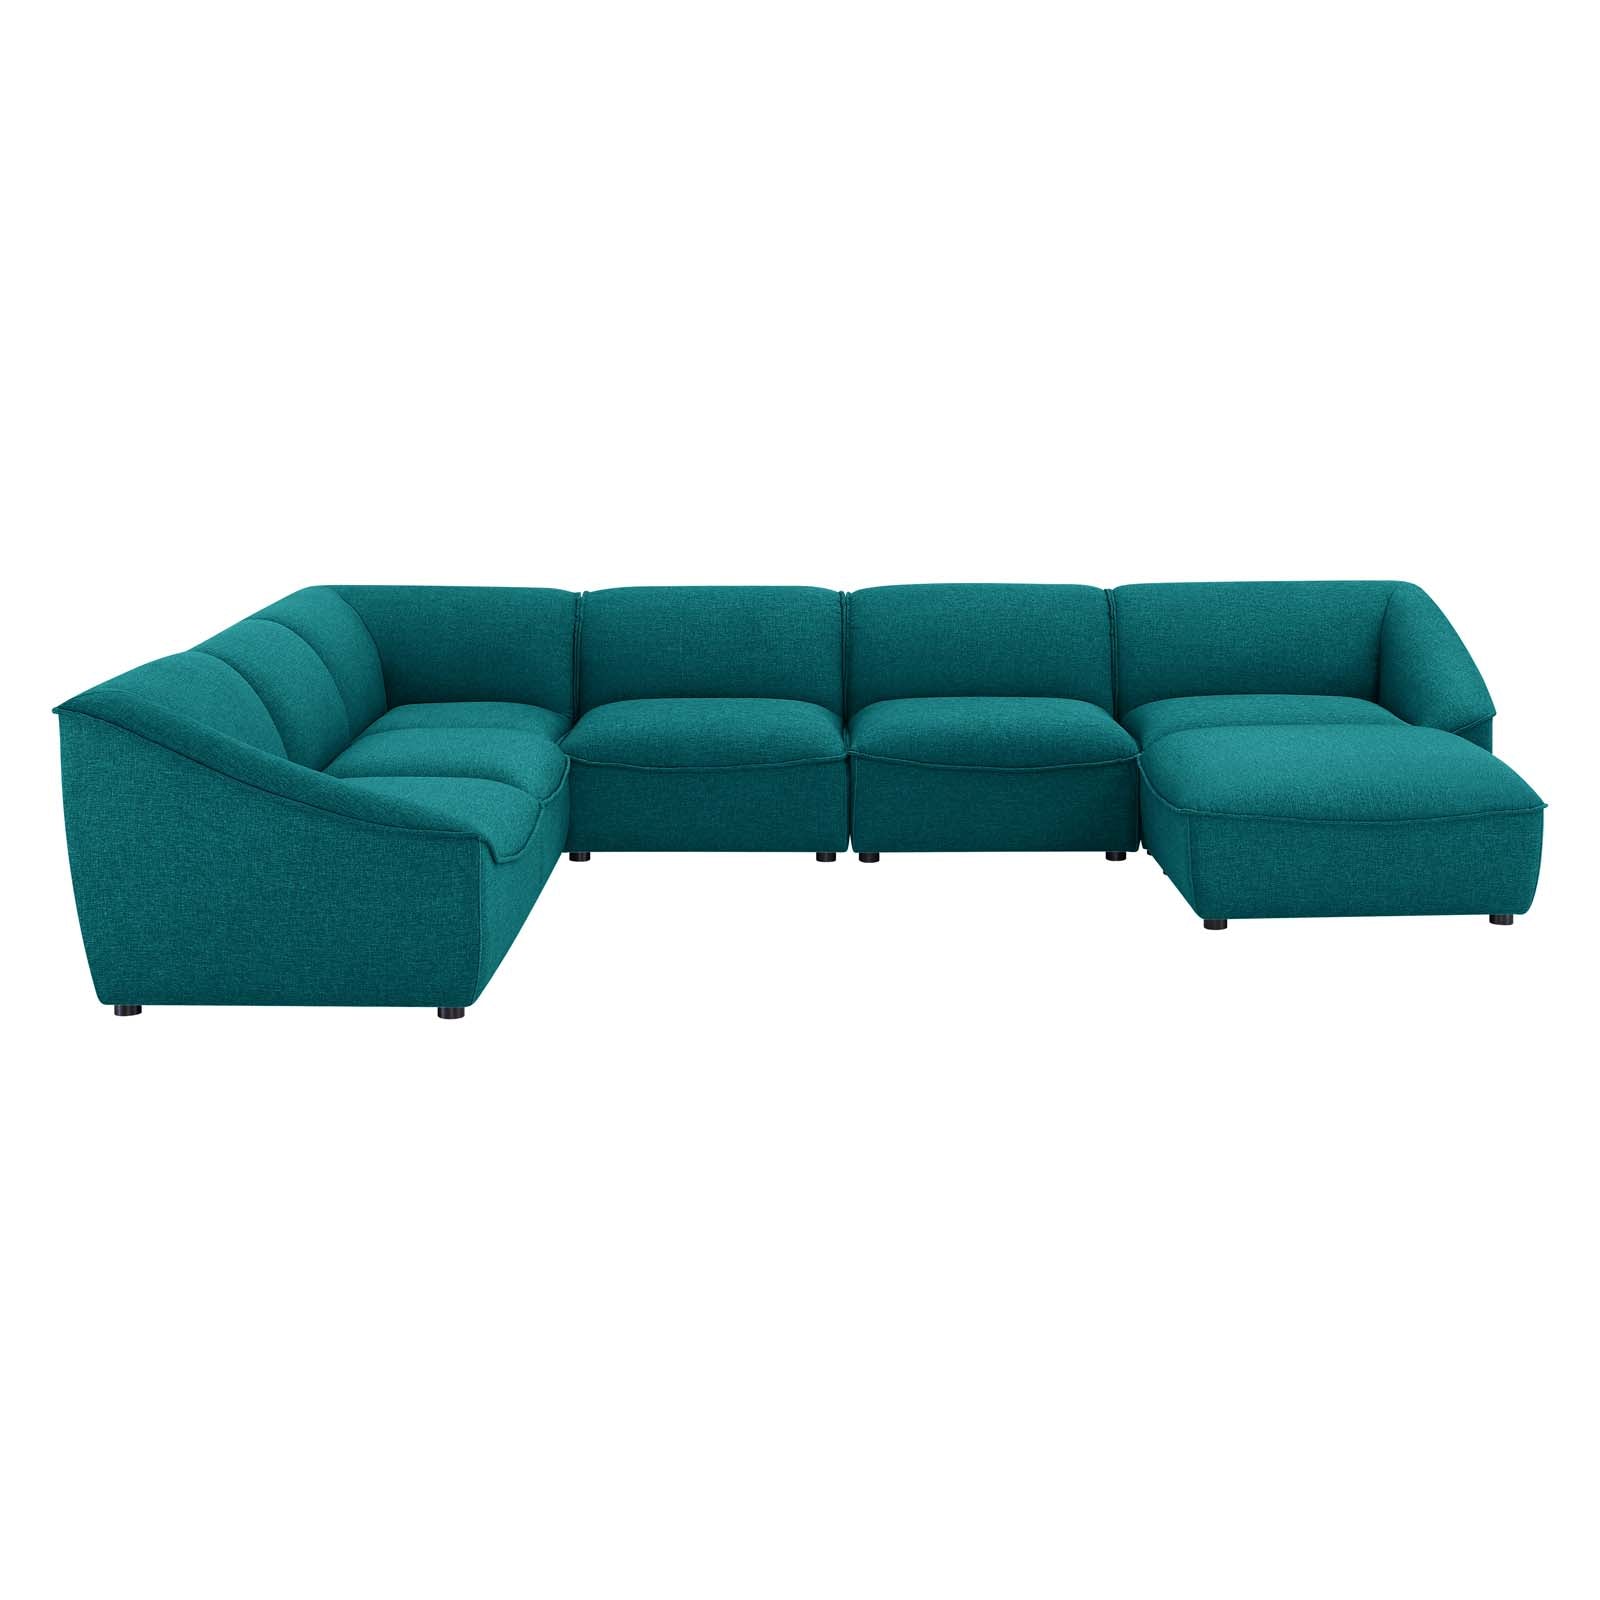 Comprise 7-Piece Sectional Sofa - East Shore Modern Home Furnishings